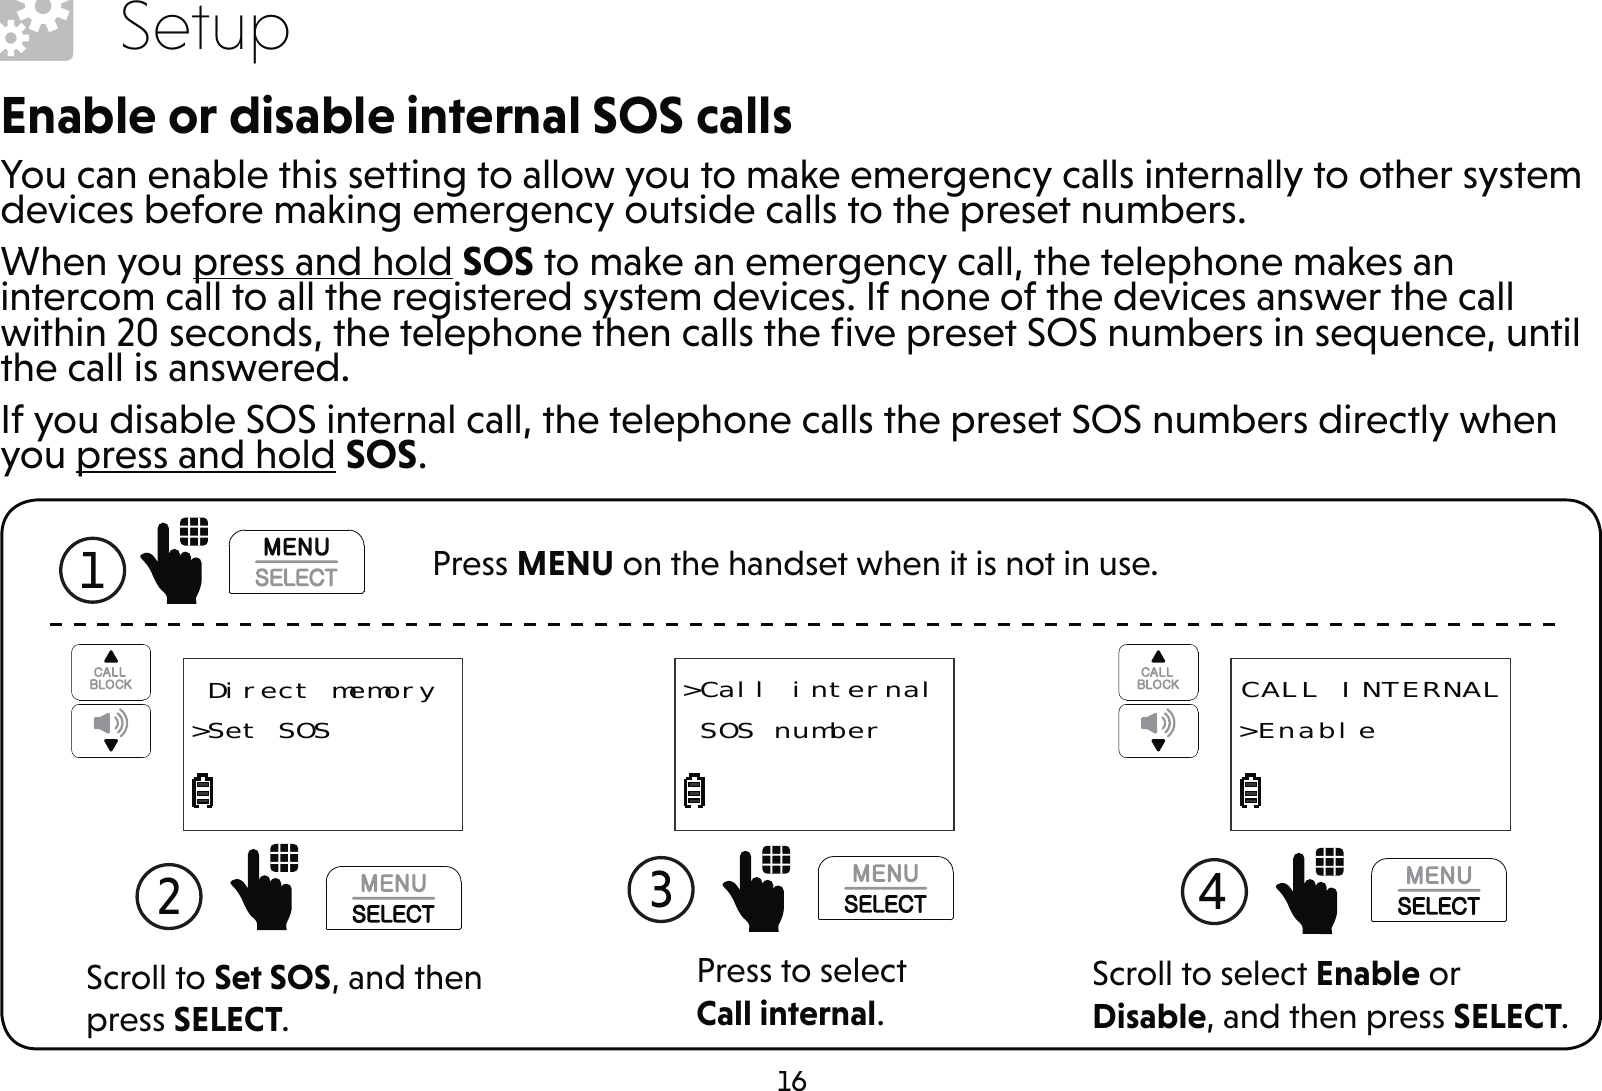 16SetupEnable or disable internal SOS callsYou can enable this setting to allow you to make emergency calls internally to other system devices before making emergency outside calls to the preset numbers.When you press and hold SOS to make an emergency call, the telephone makes an intercom call to all the registered system devices. If none of the devices answer the call within 20 seconds, the telephone then calls the ﬁve preset SOS numbers in sequence, until the call is answered.If you disable SOS internal call, the telephone calls the preset SOS numbers directly when you press and hold SOS.Press to select Call internal.3 &gt;Call internal SOS numberScroll to select Enable or Disable, and then press SELECT.4  CALL INTERNAL&gt;EnableScroll to Set SOS, and then press SELECT.2   Direct memory&gt;Set SOS1  Press MENU on the handset when it is not in use.